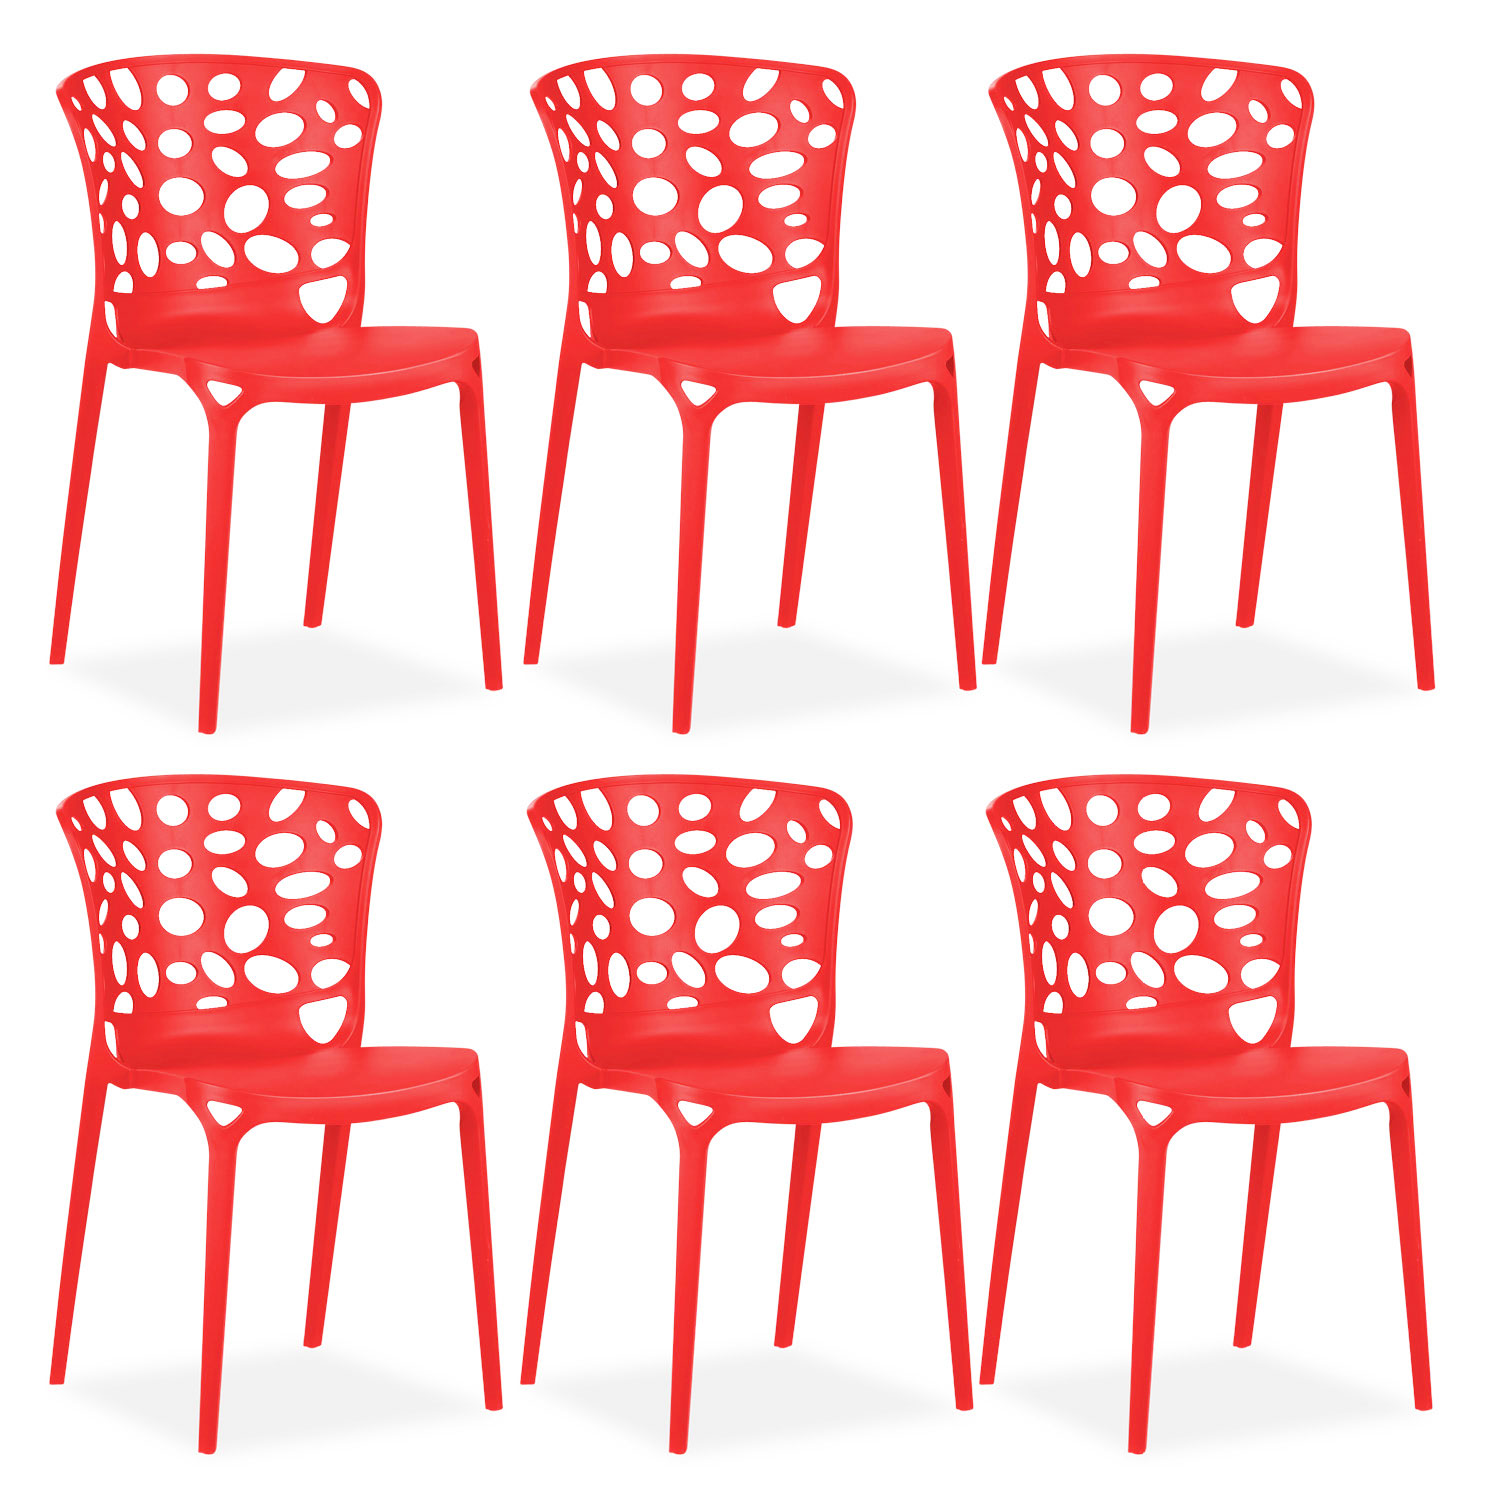 Set of 2, 4, 6 Garden chair Modern 3 colours Camping chairs Outdoor chairs Plastic Stacking chairs Kitchen chairs